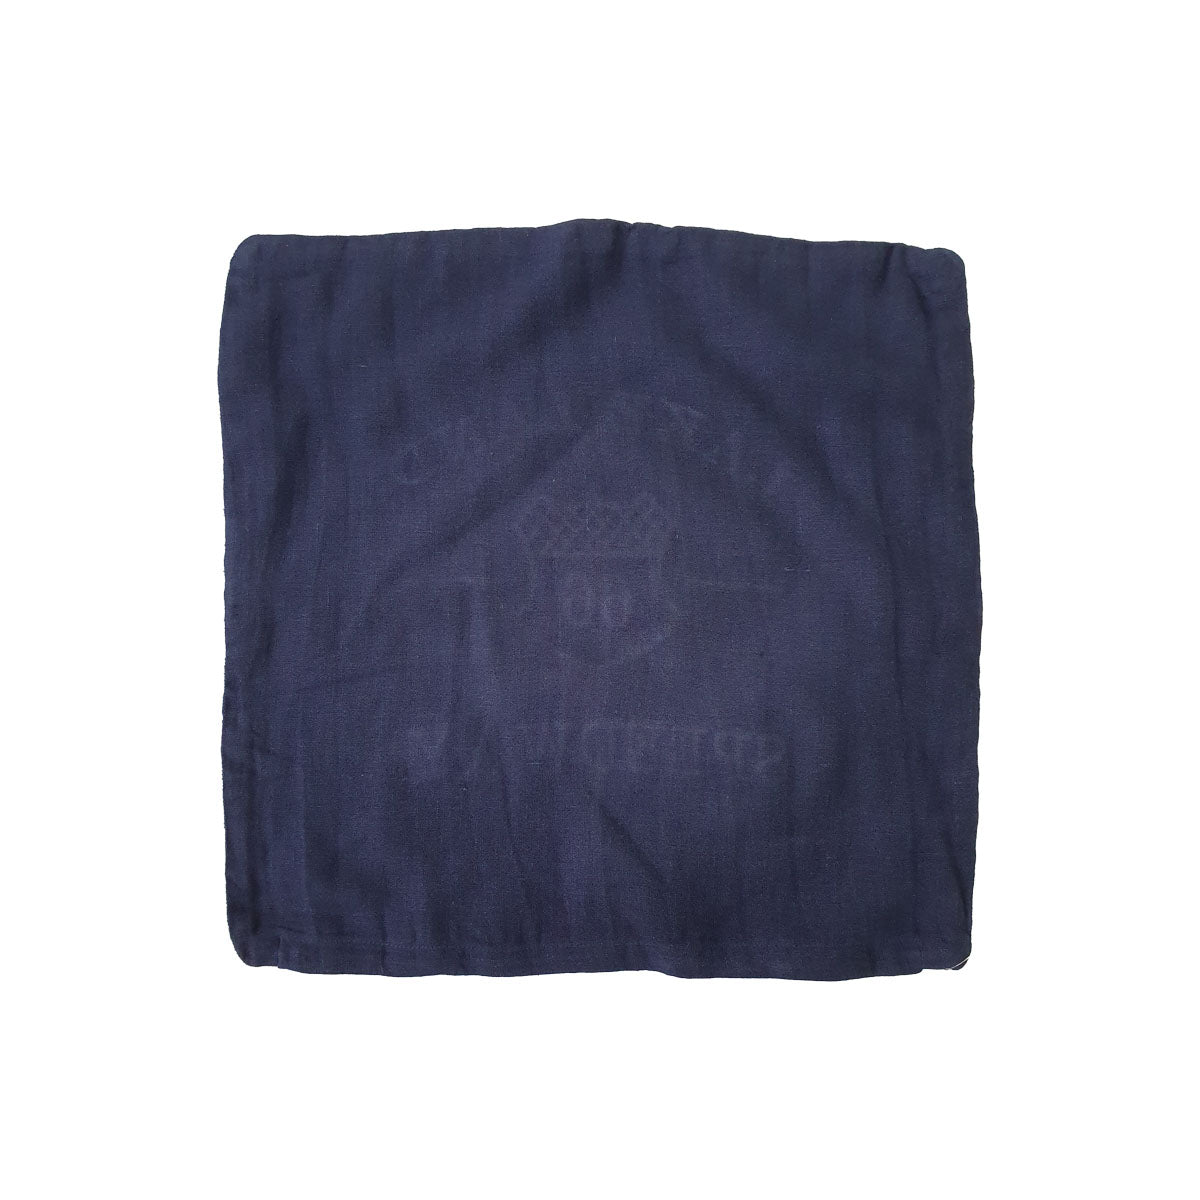 Embroidered Cushion Cover - Navy